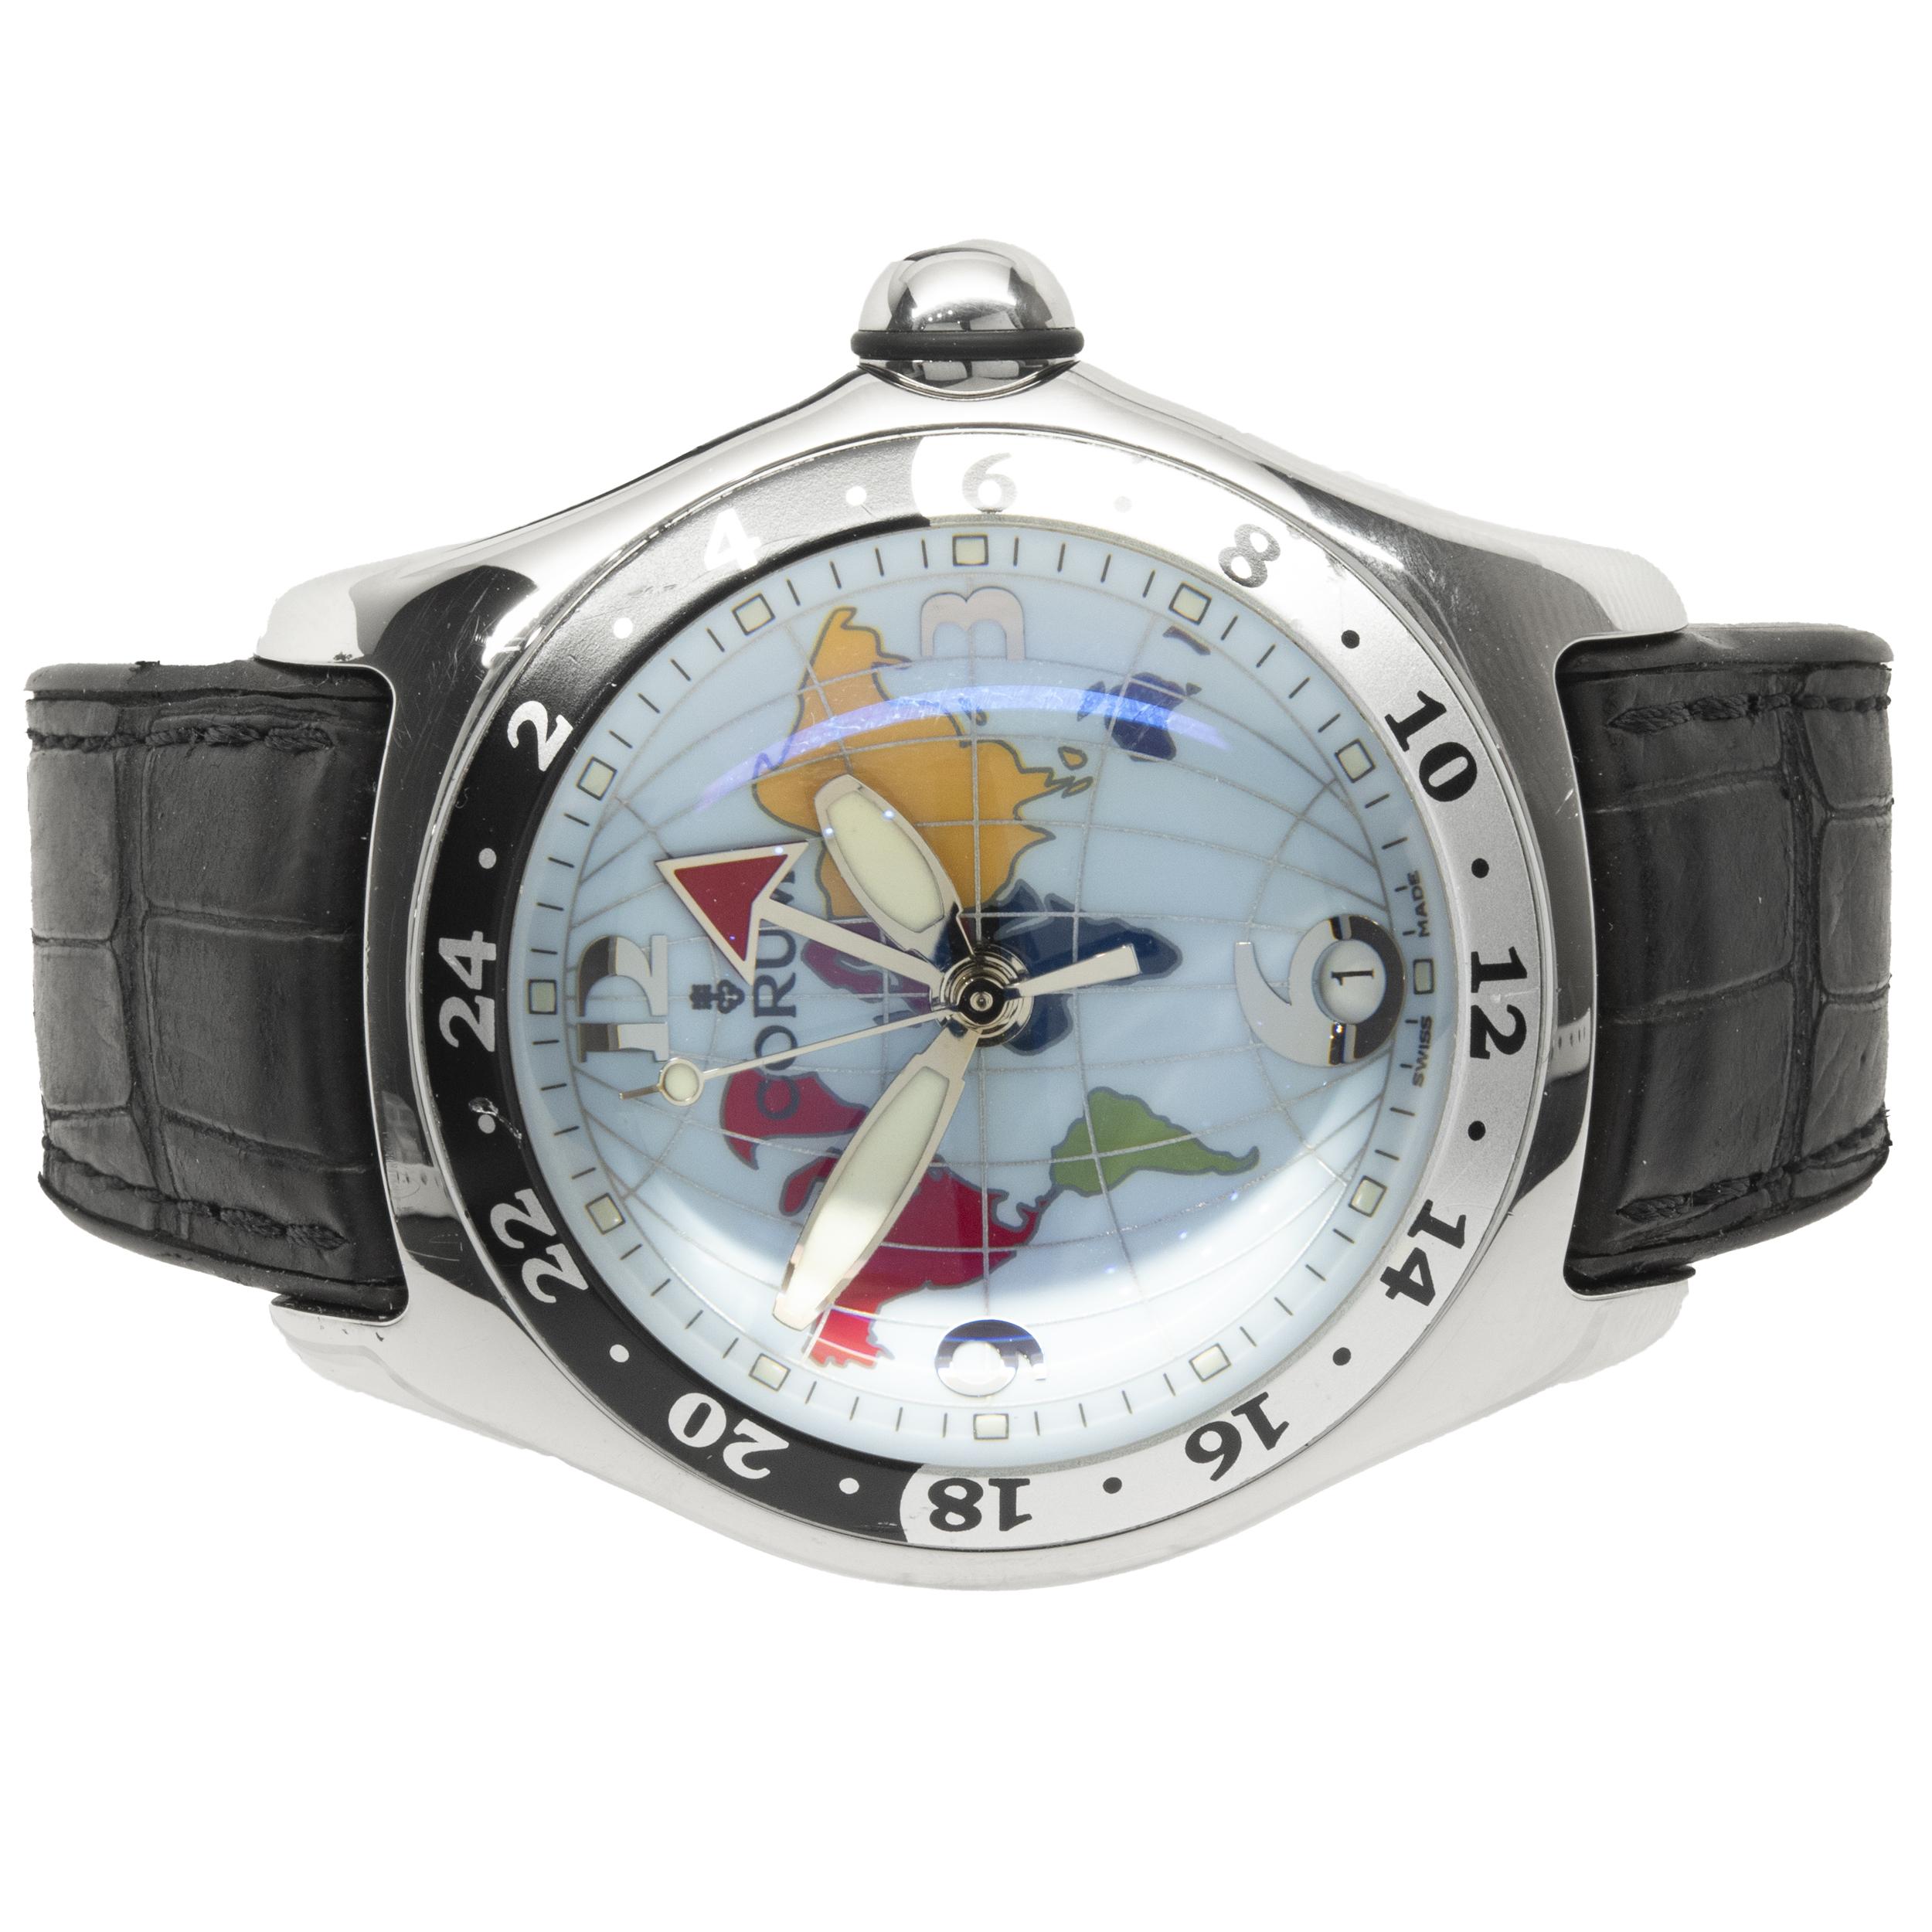 Movement: automatic
Function: hours, minutes, seconds
Case: 47mm stainless steel round case, sapphire bubble crystal, push/pull crown
Band: black leather strap, stainless steel corum deployment clasp
Dial: world map
Serial #: 80XXX
Reference #: